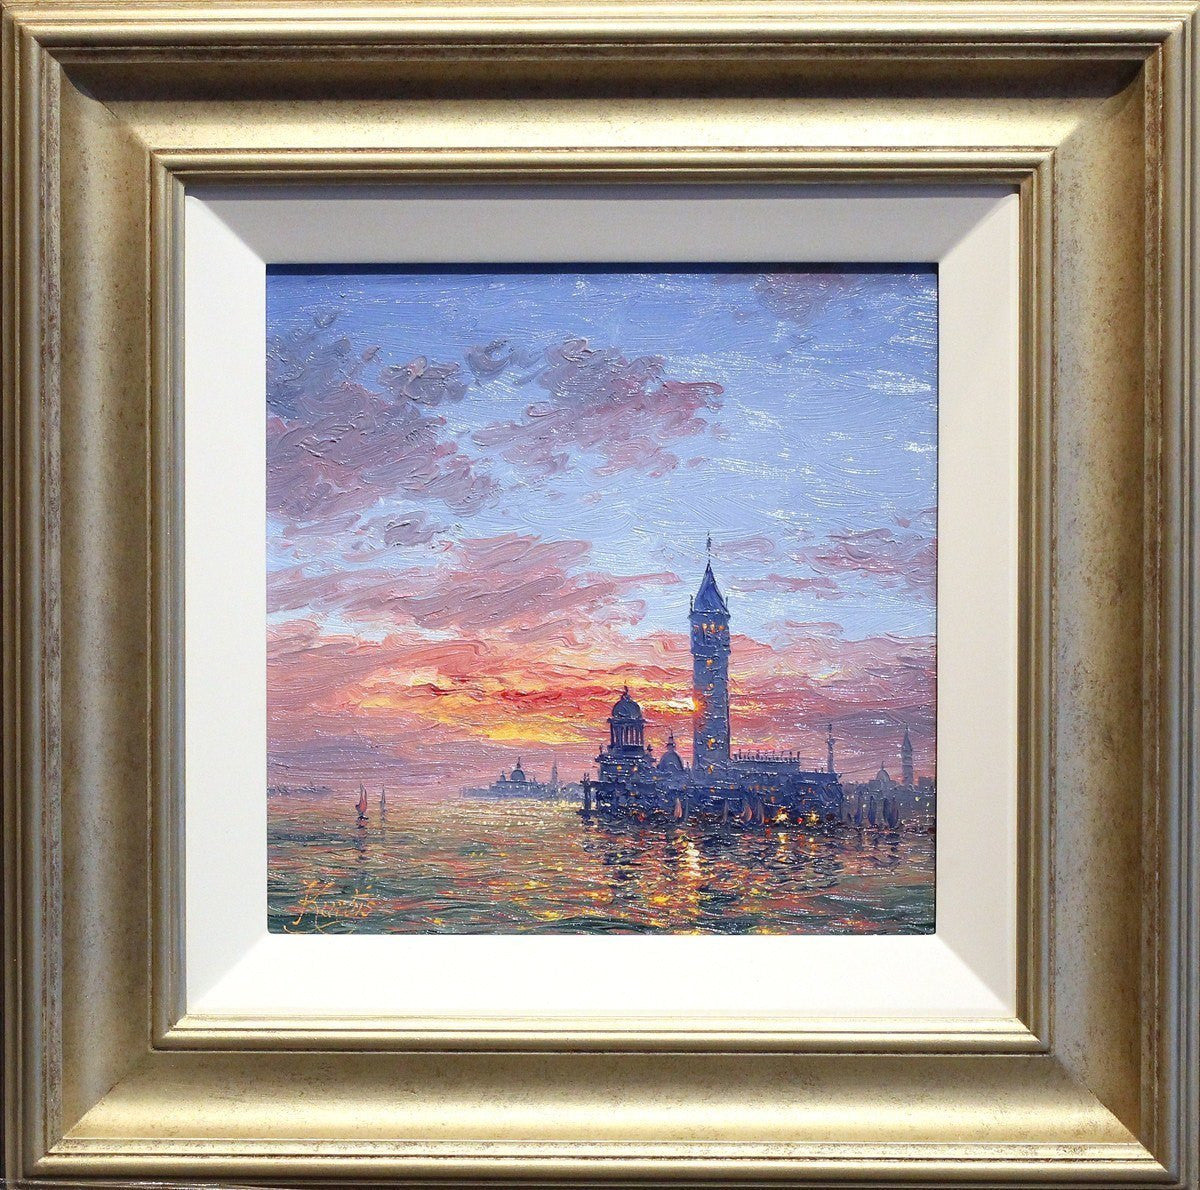 Reflections of Venice - SOLD Andrew Grant Kurtis